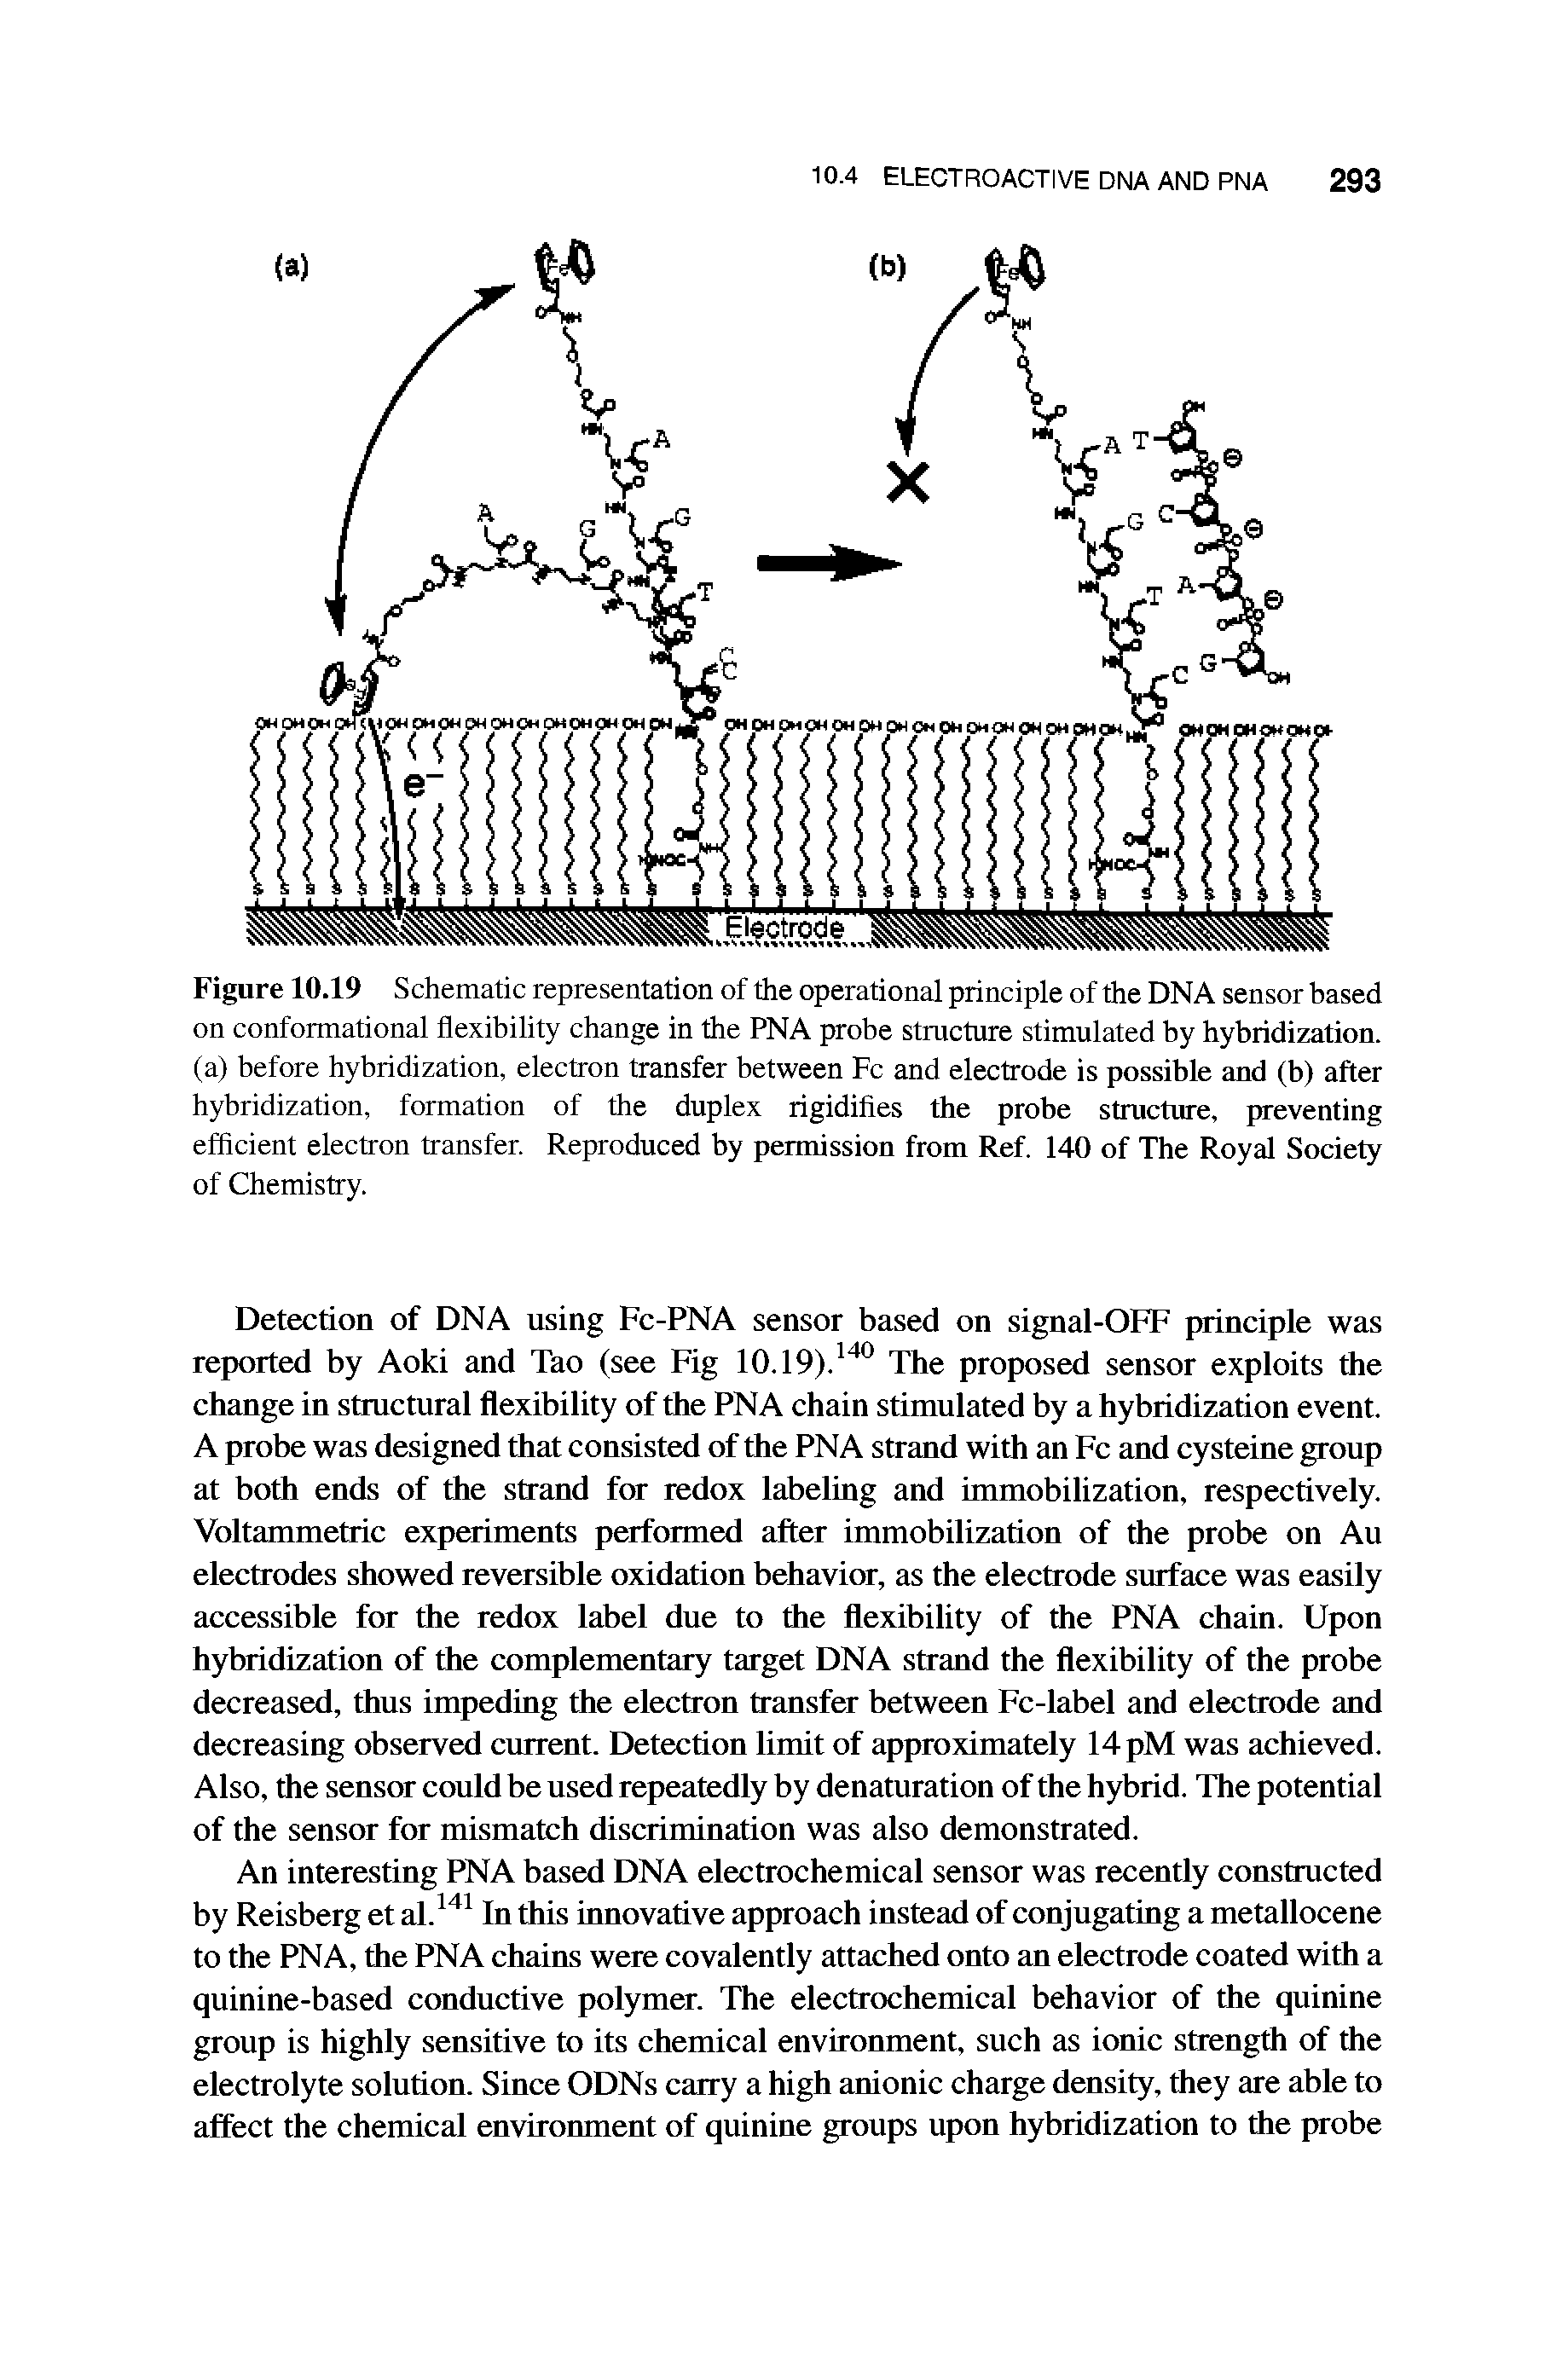 Figure 10.19 Schematic representation of the operational principle of the DNA sensor based on conformational flexibility change in the PNA probe structure stimulated by hybridization, (a) before hybridization, electron transfer between Fc and electrode is possible and (b) after hybridization, formation of the duplex rigidifies the probe structure, preventing efficient electron transfer. Reproduced by permission from Ref. 140 of The Royal Society of Chemistry.